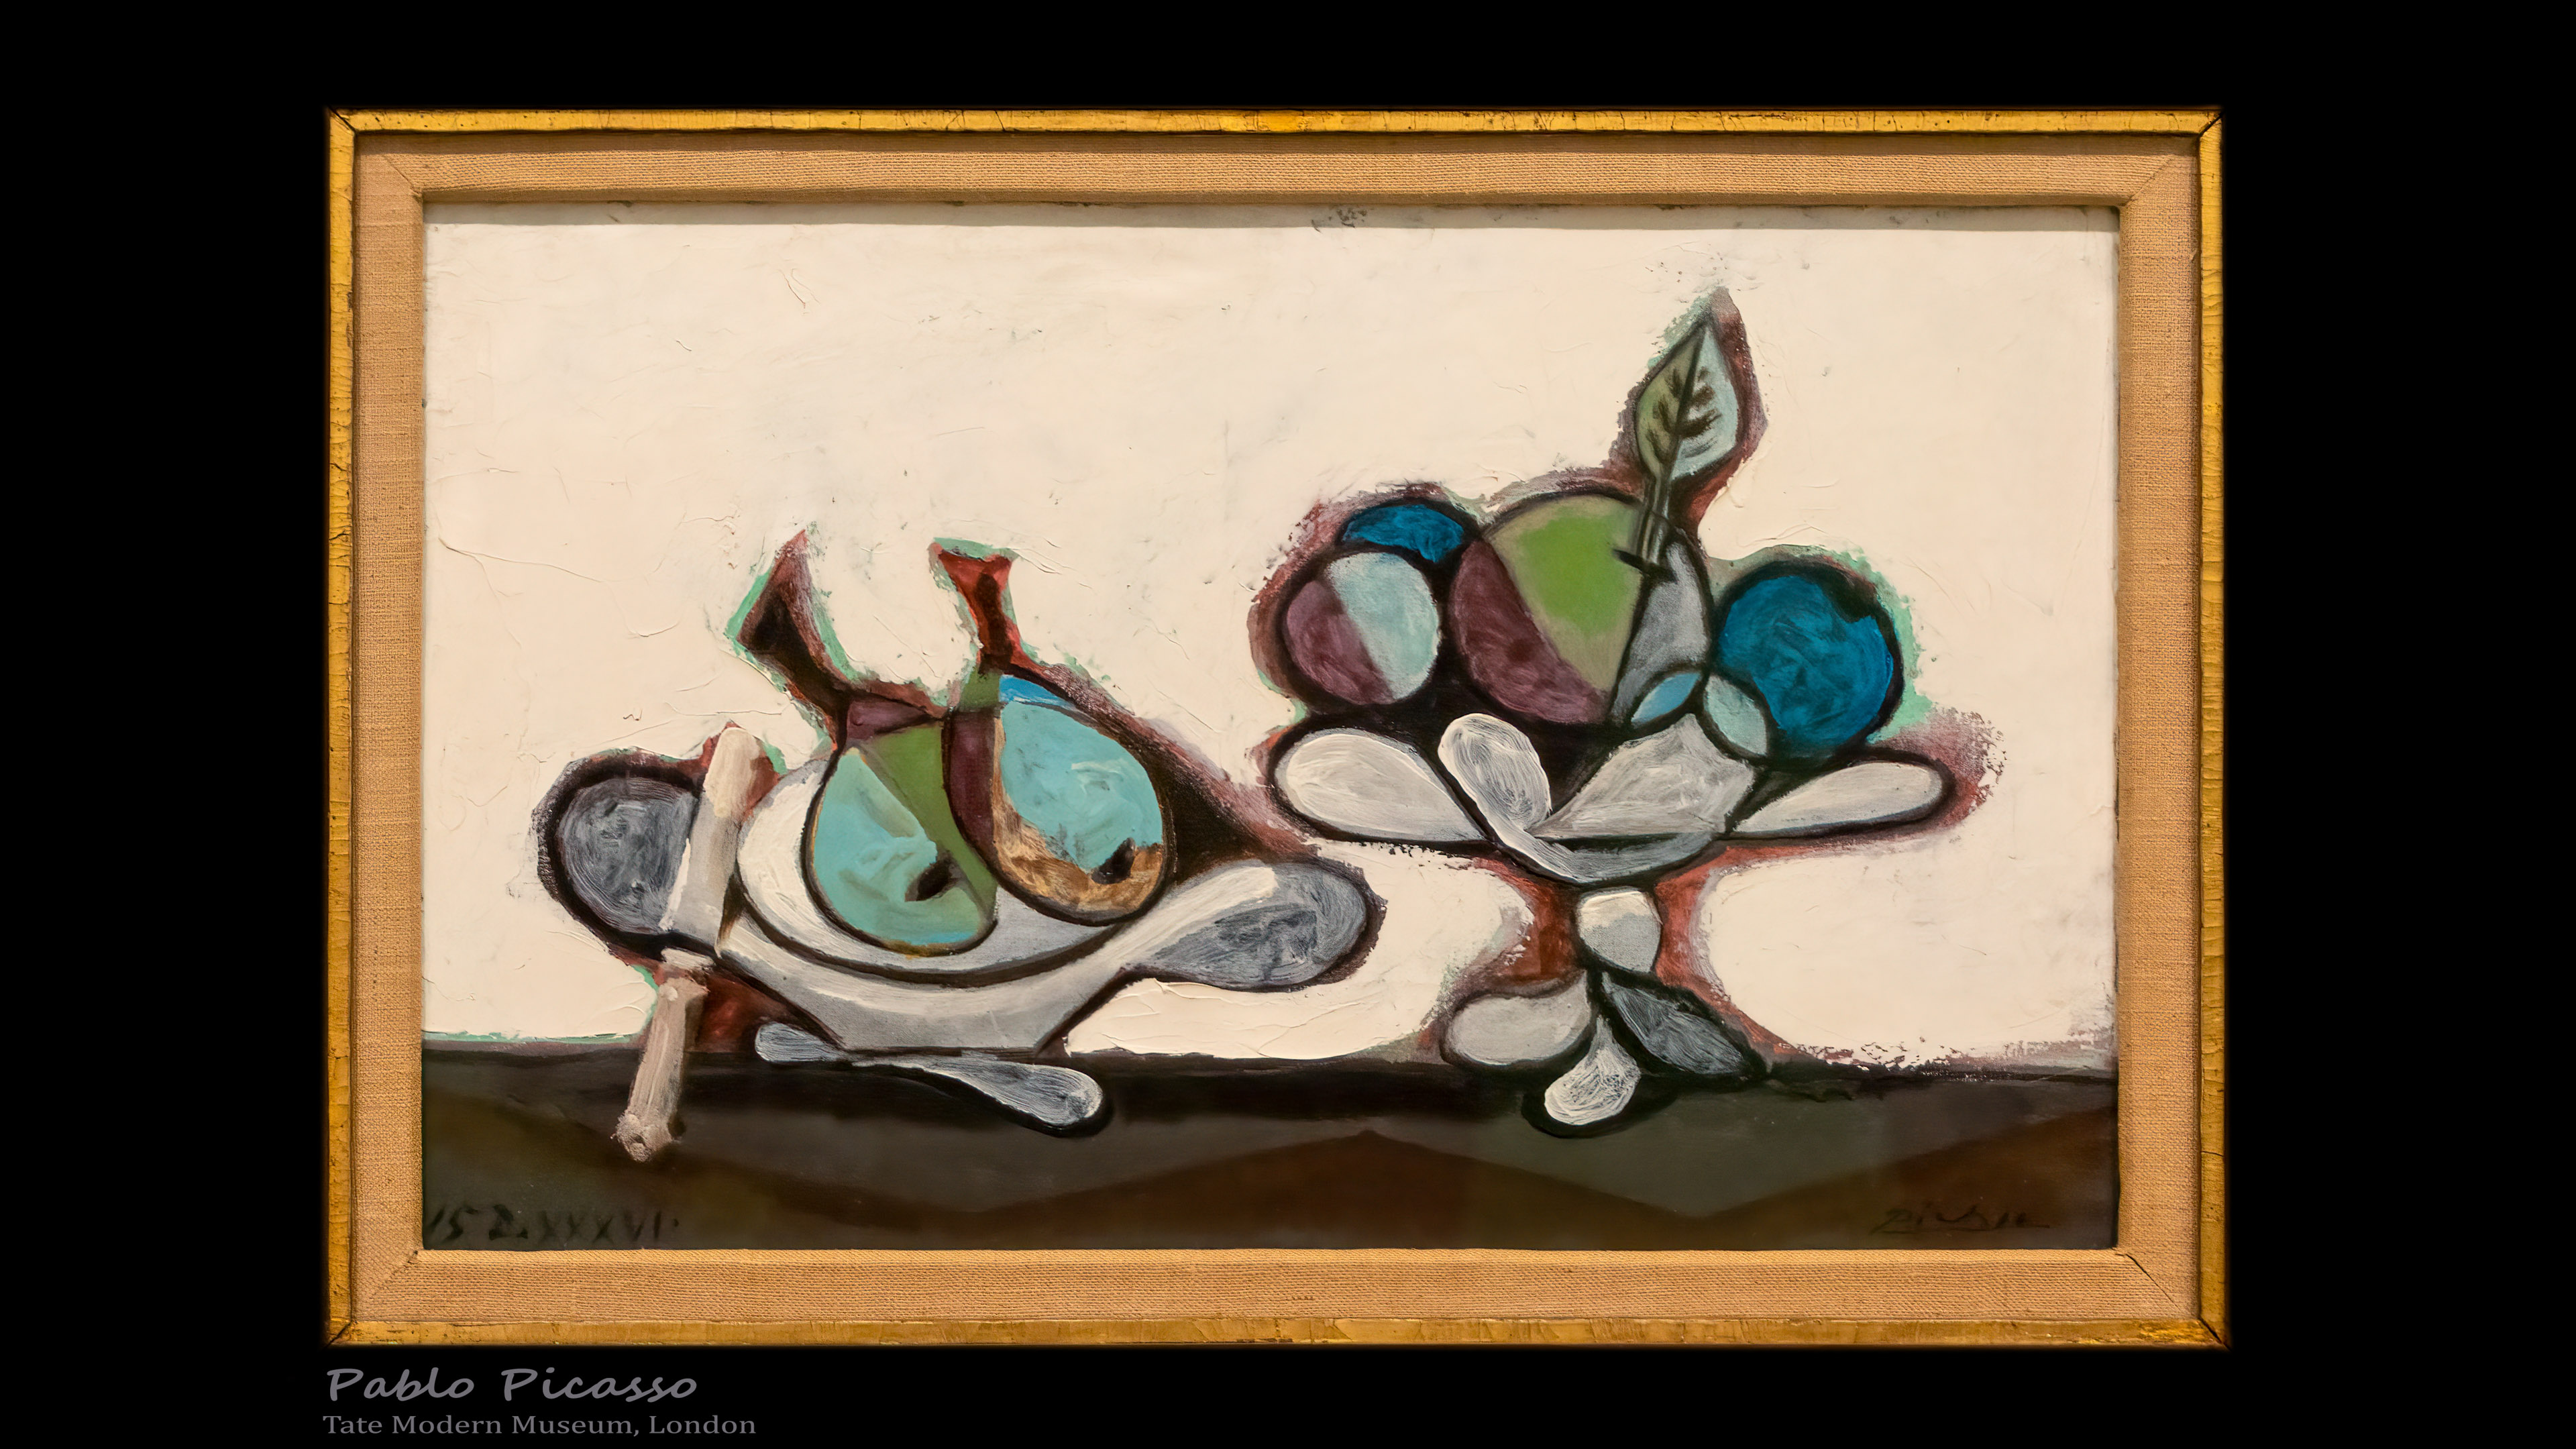 Adorn your screen with the abstract brilliance of Pablo Picasso's masterpieces in high definition.